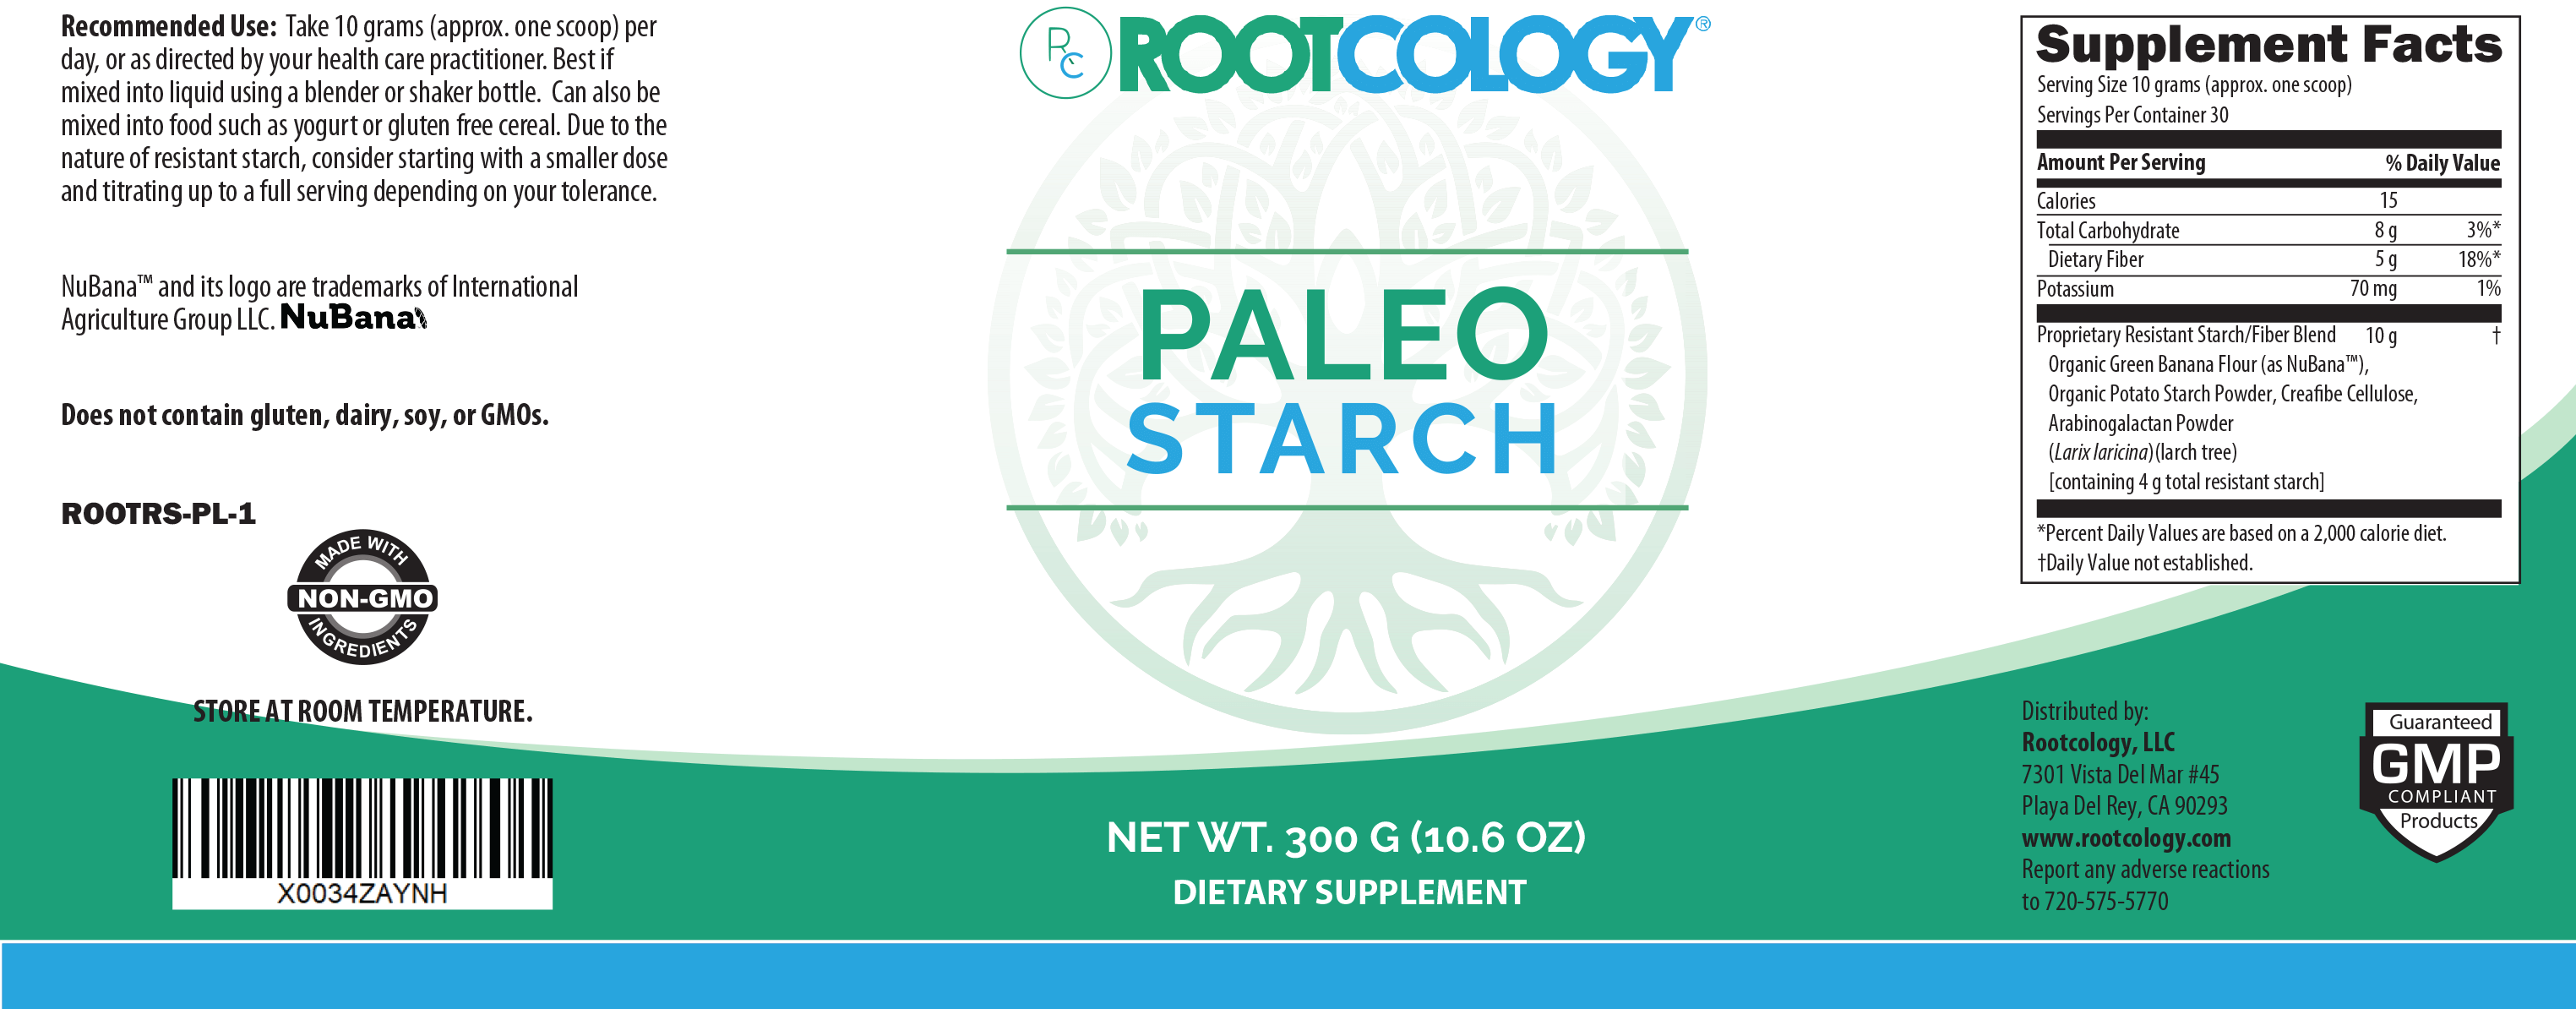 Rootcology Paleo Starch Supplement Label